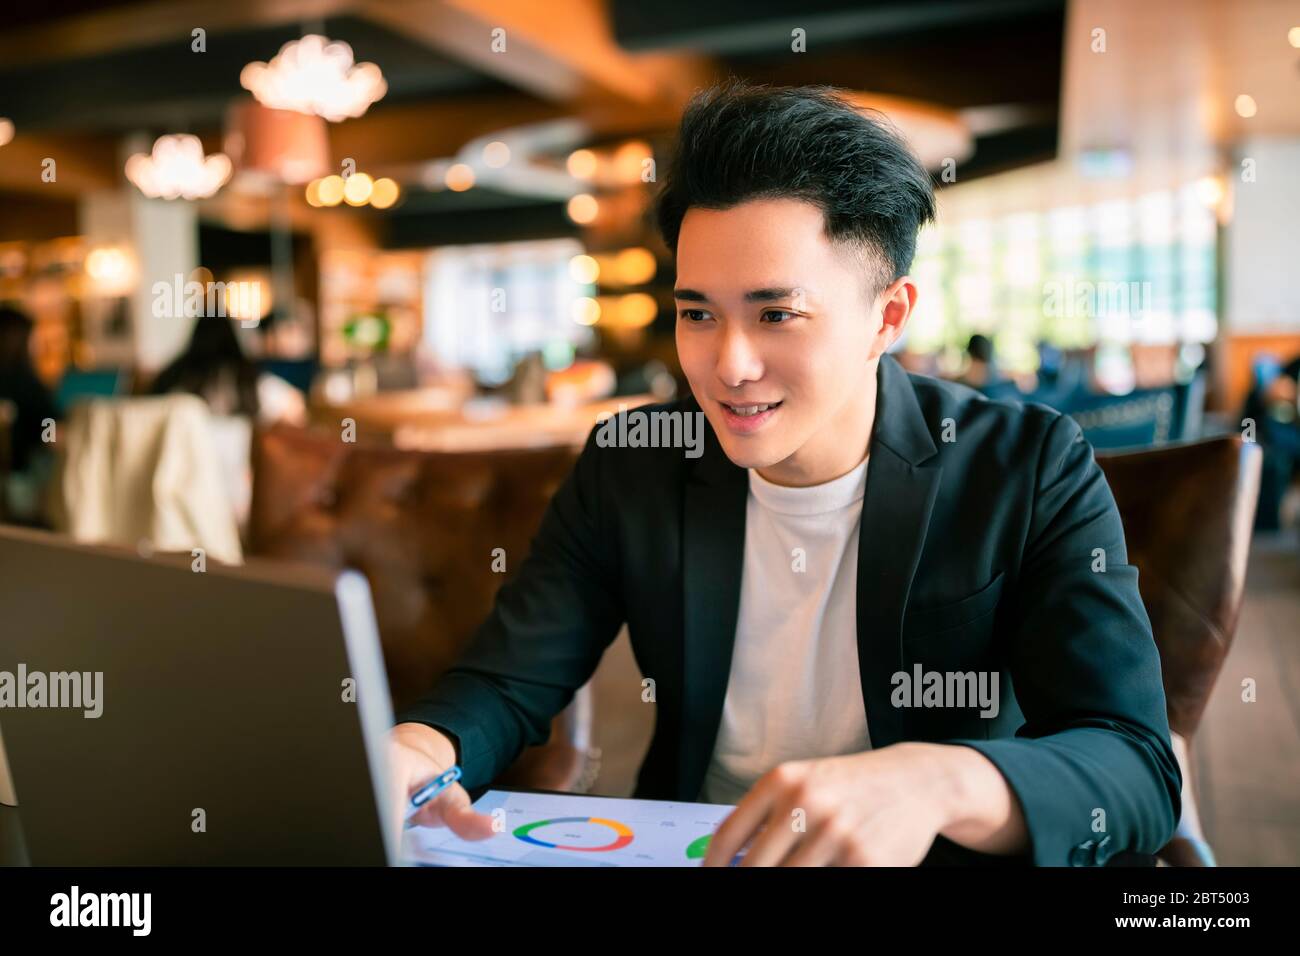 young Business man  Working On Laptop In Coffee Shop Stock Photo